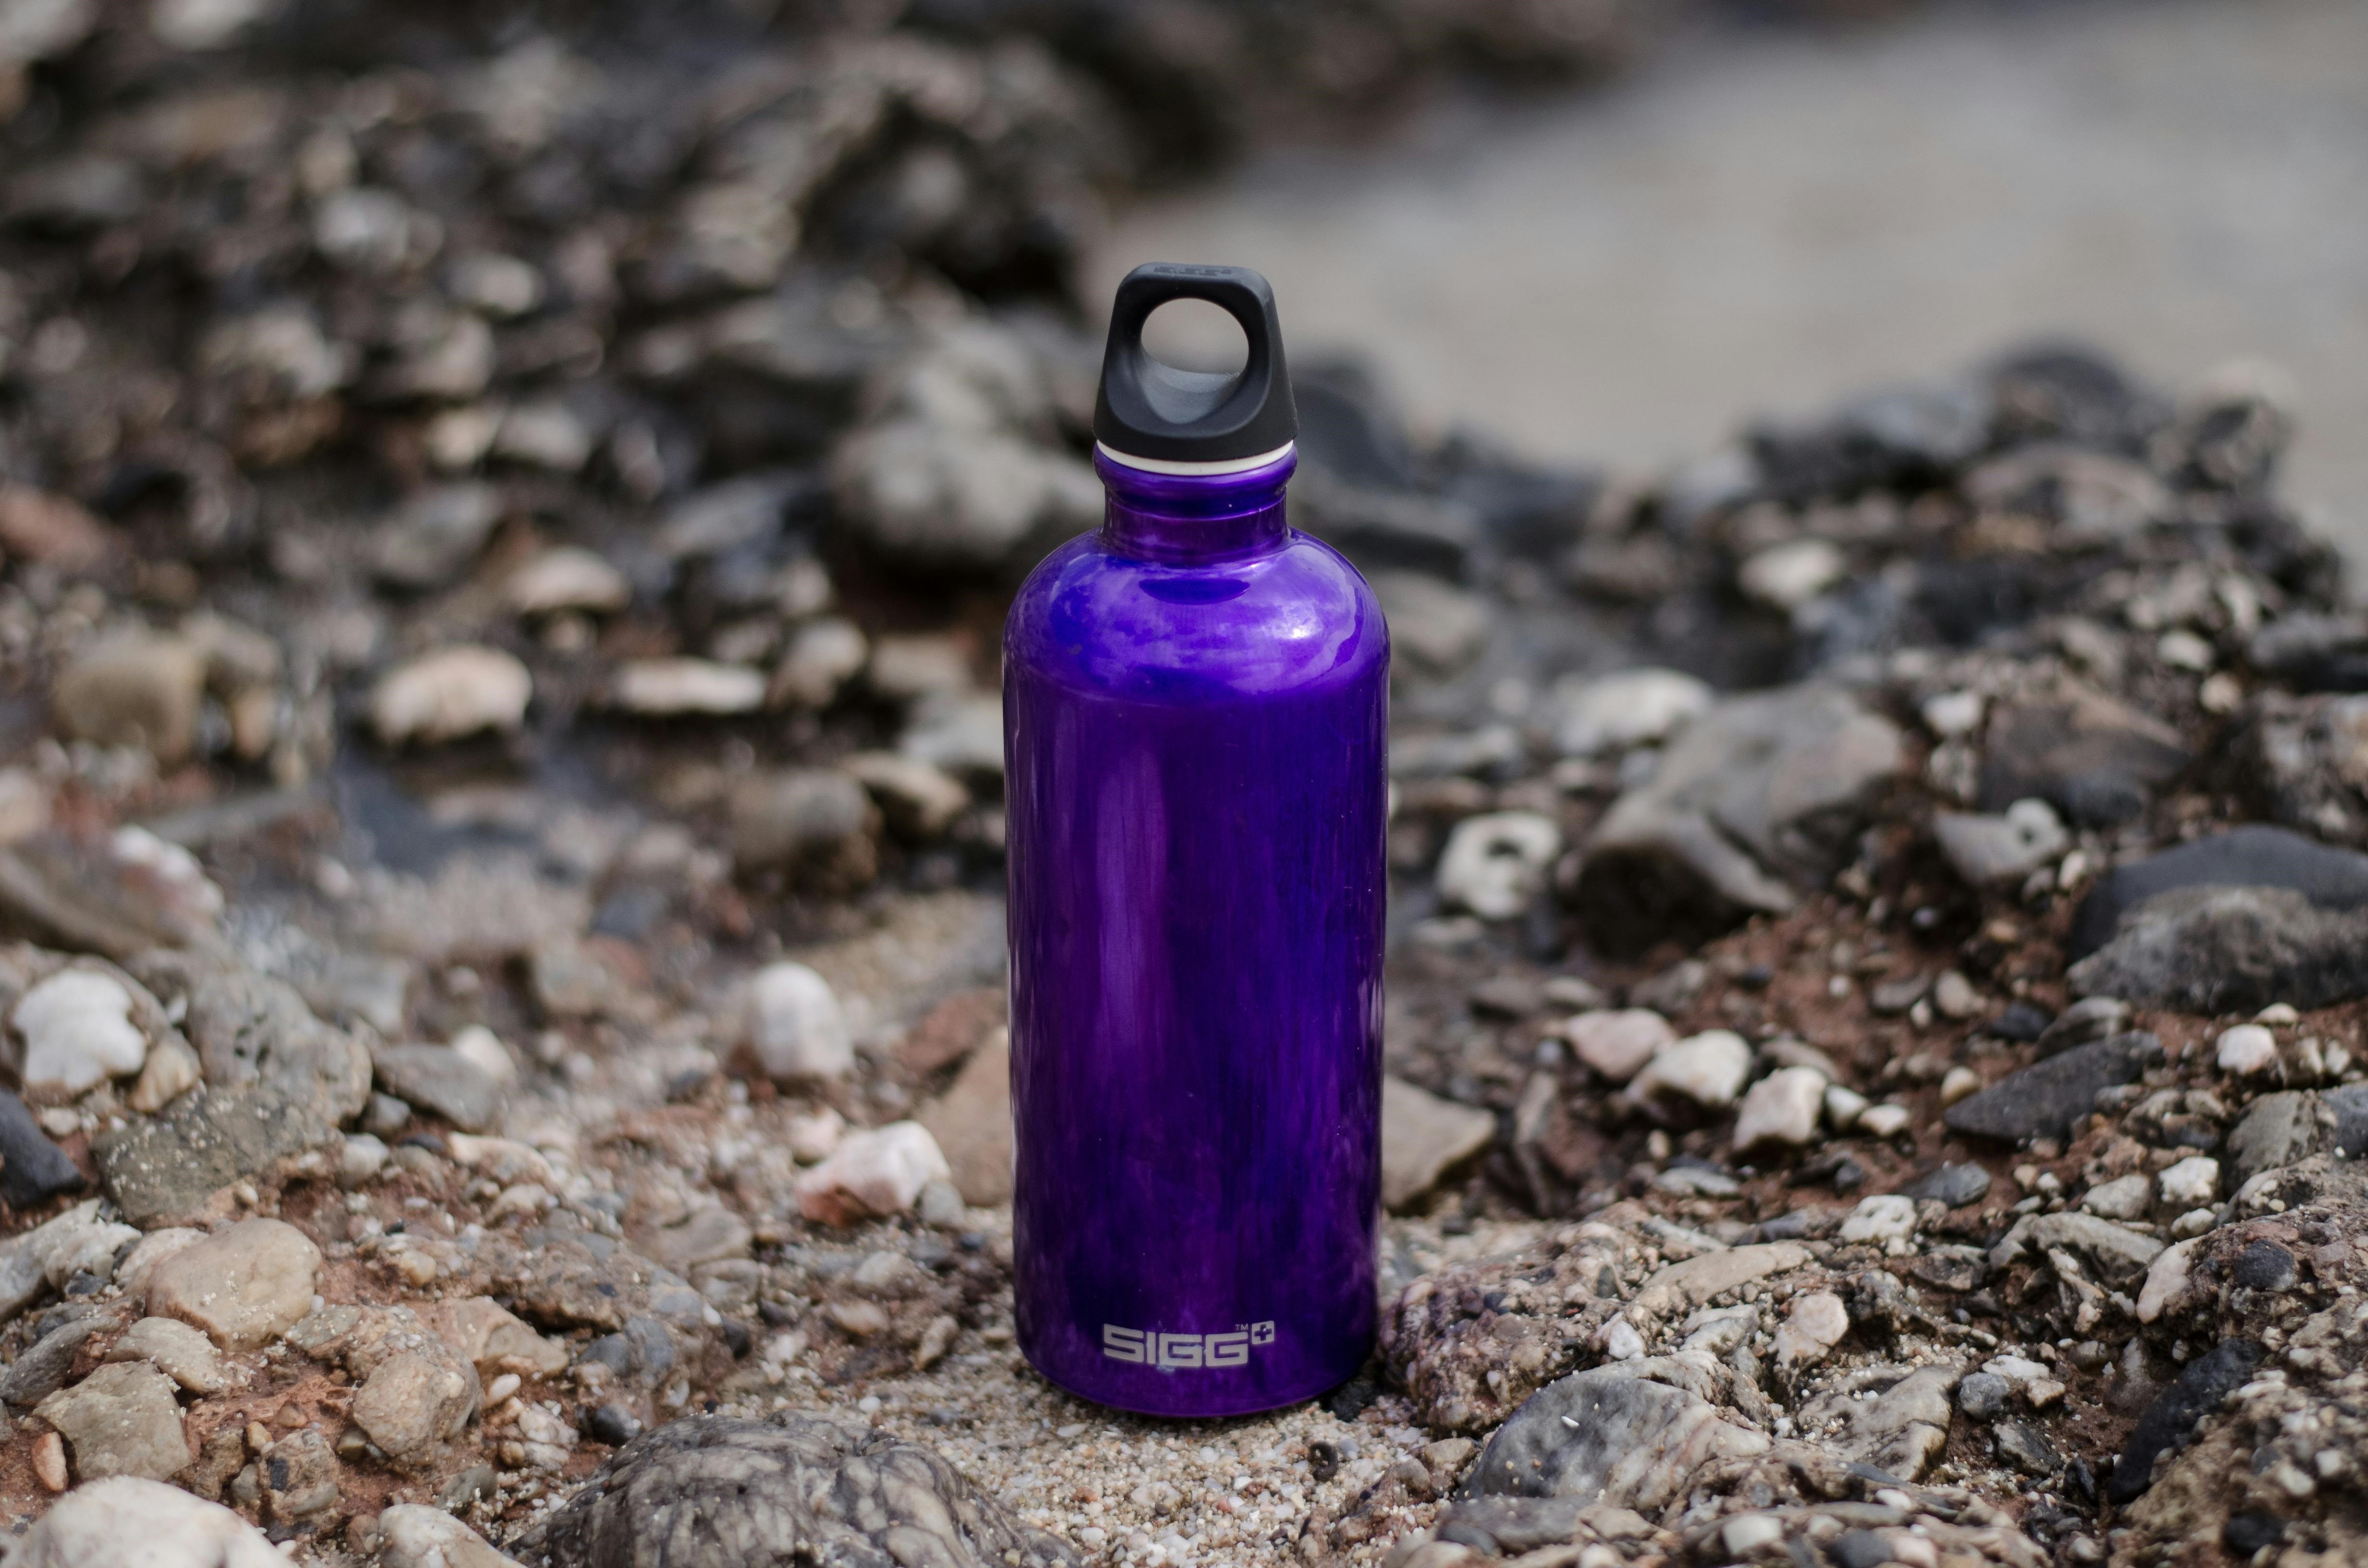 Picture of a purple water bottle with a purple anodized finish.